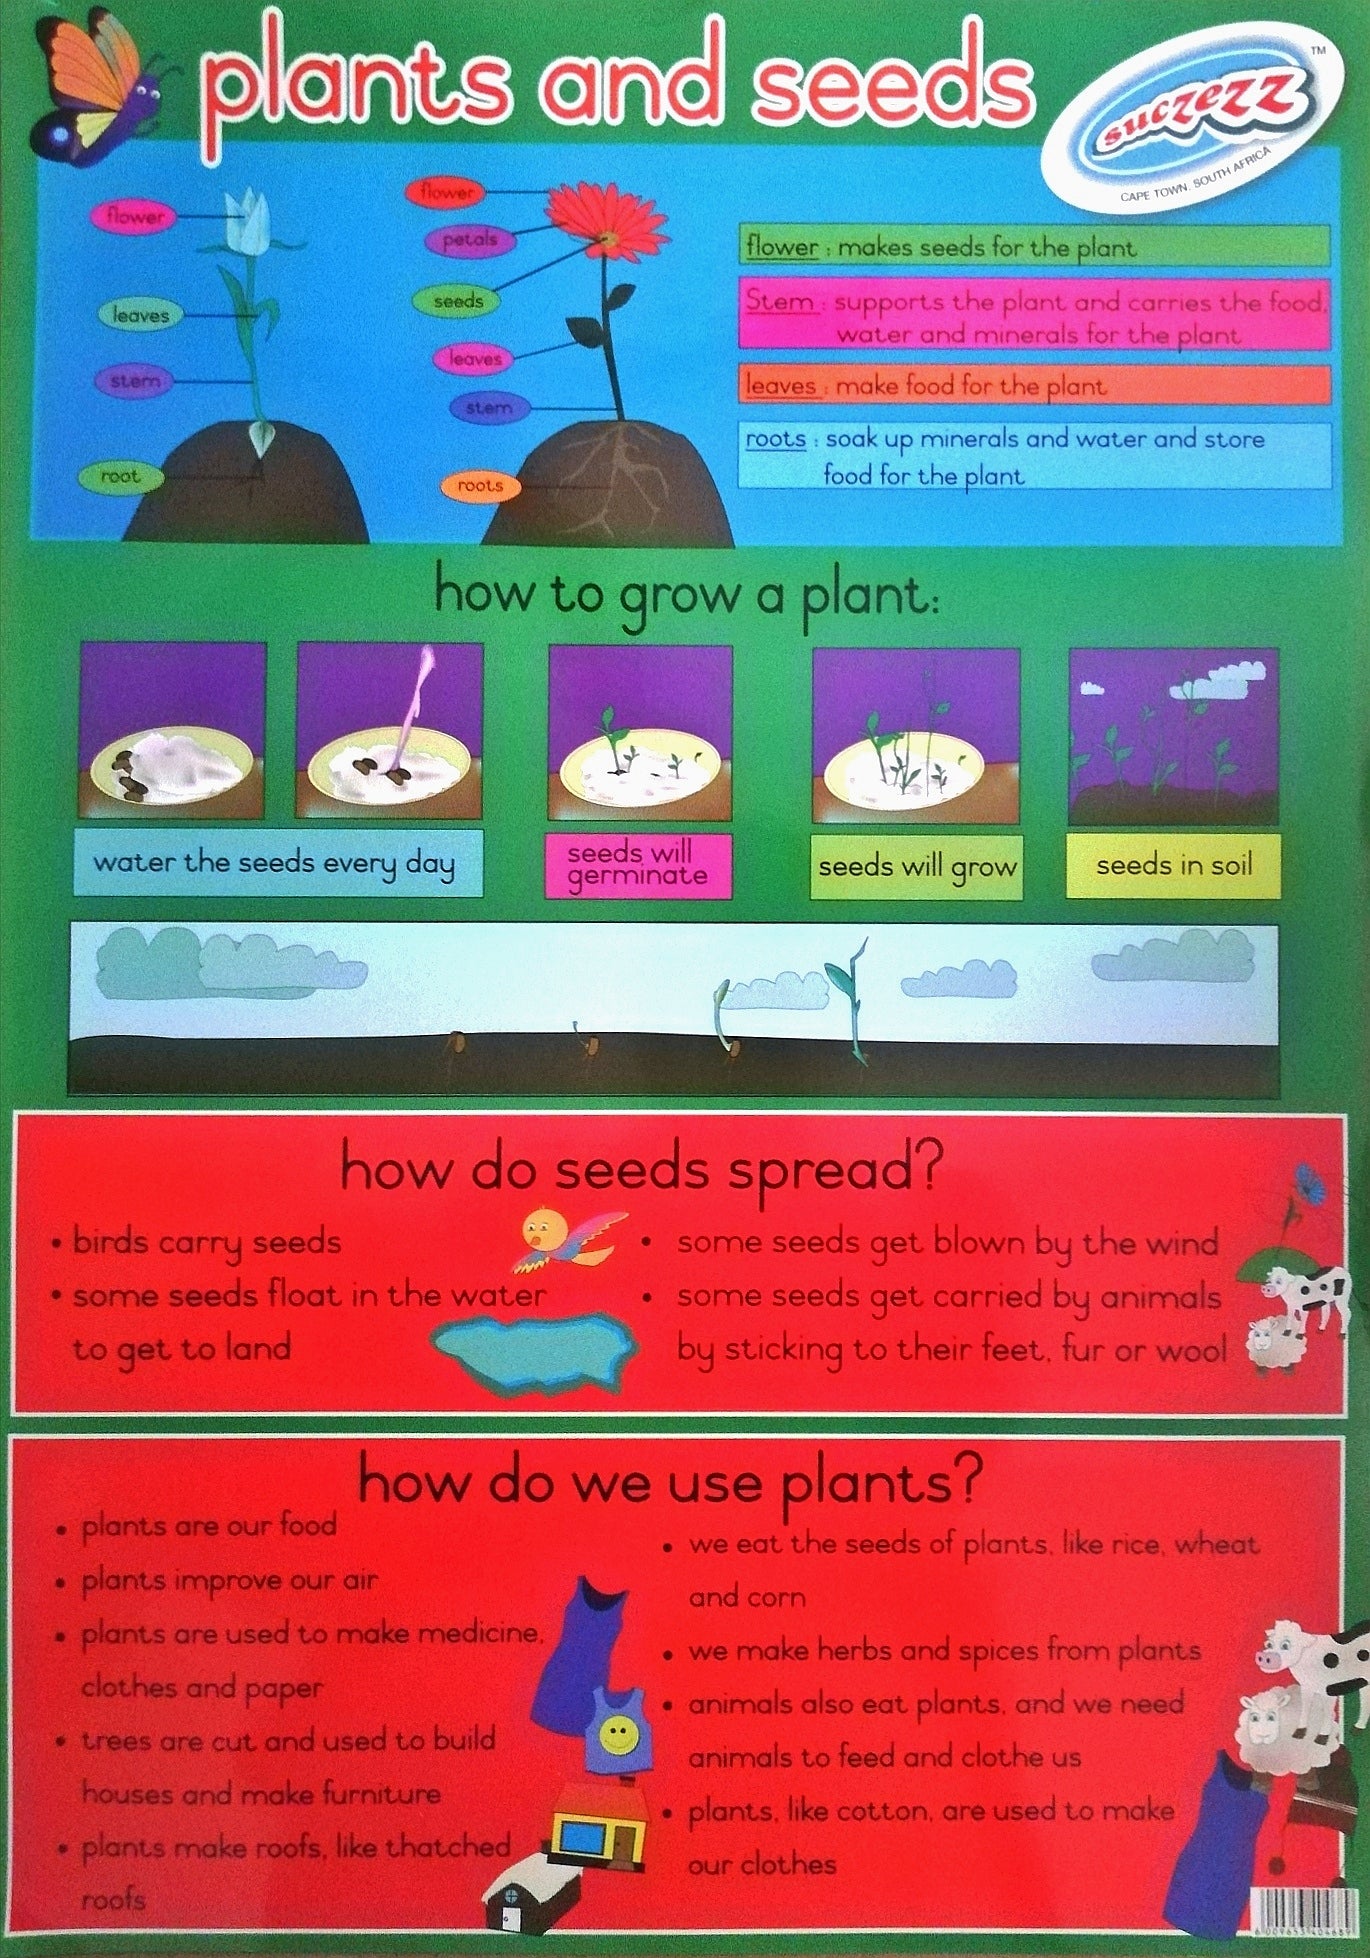 Poster - Plants and seeds